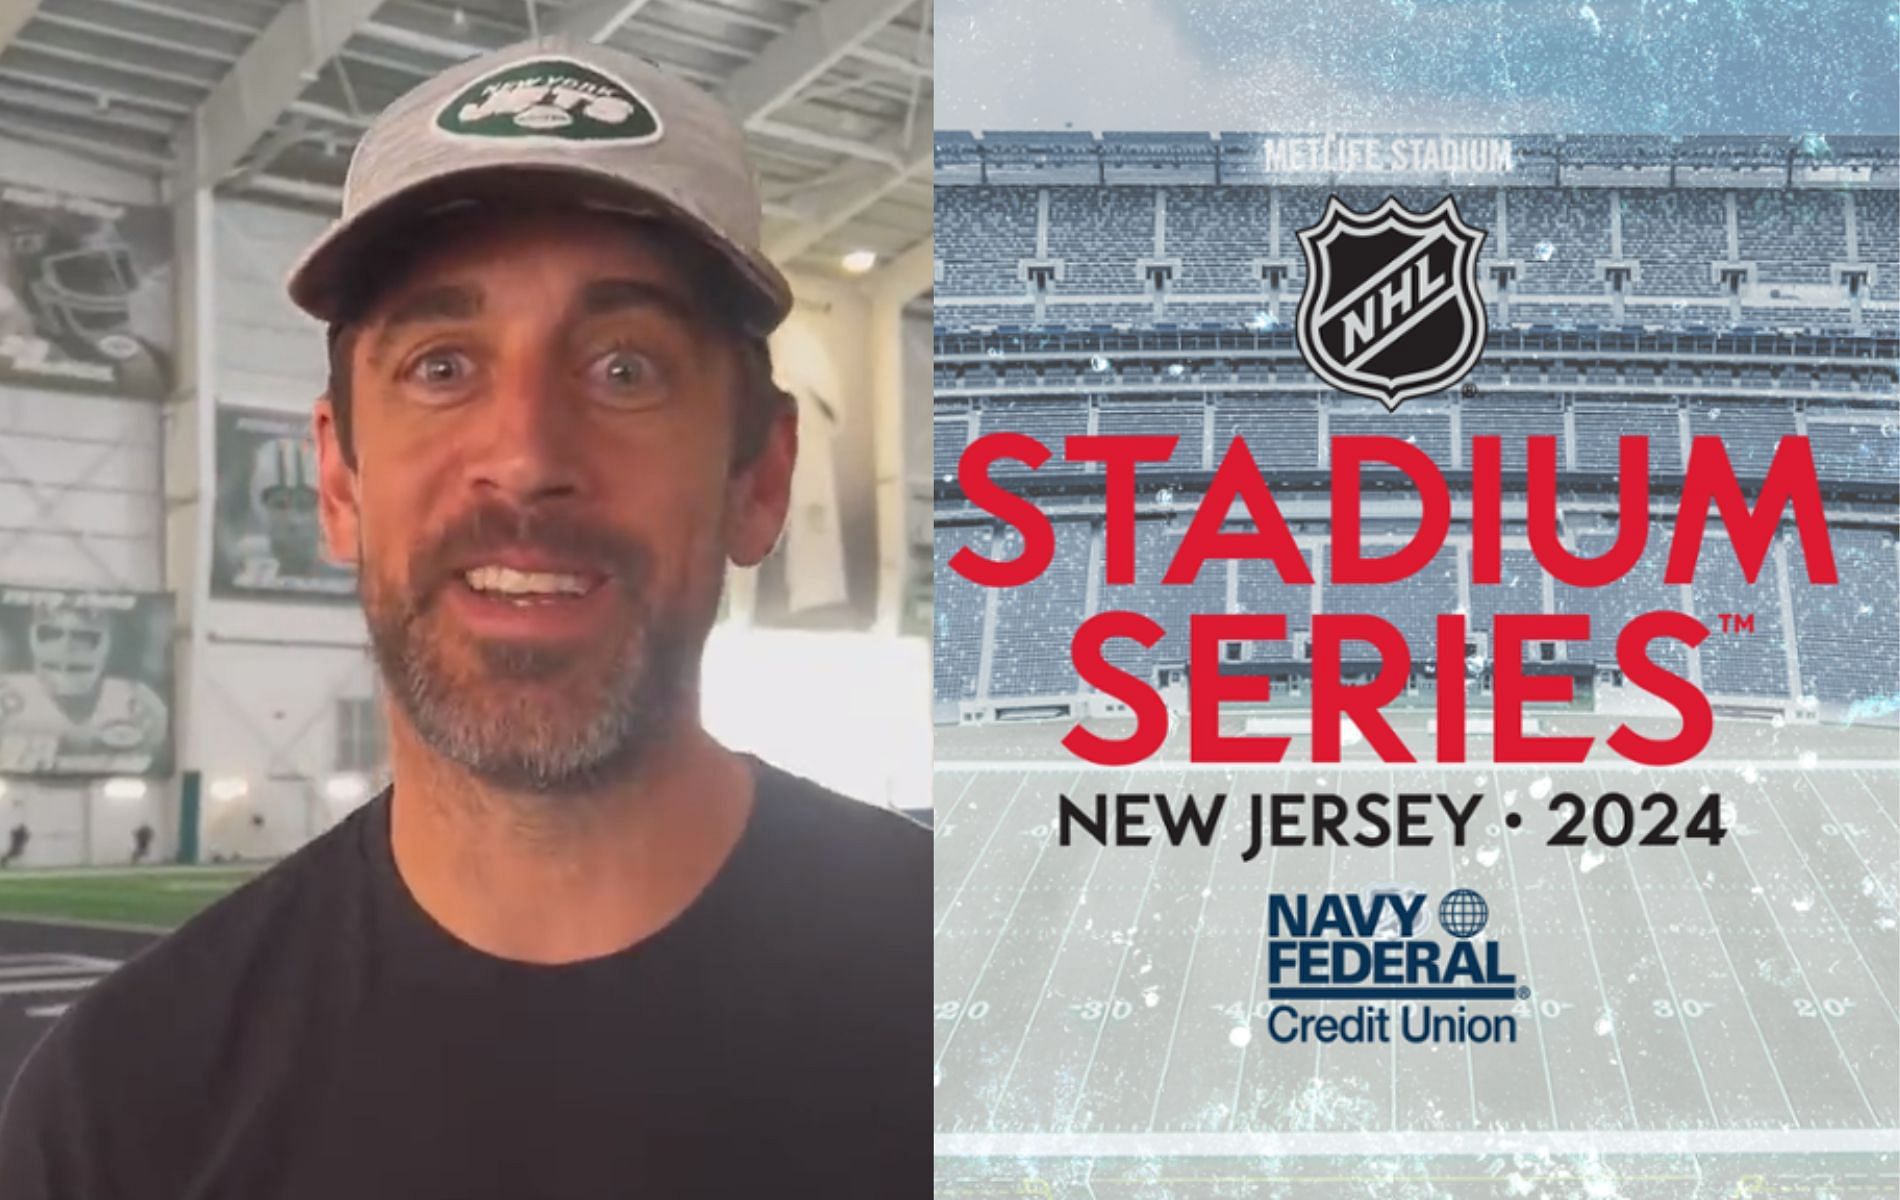 2024 NHL Stadium Series at MetLife expected to be back-to-back